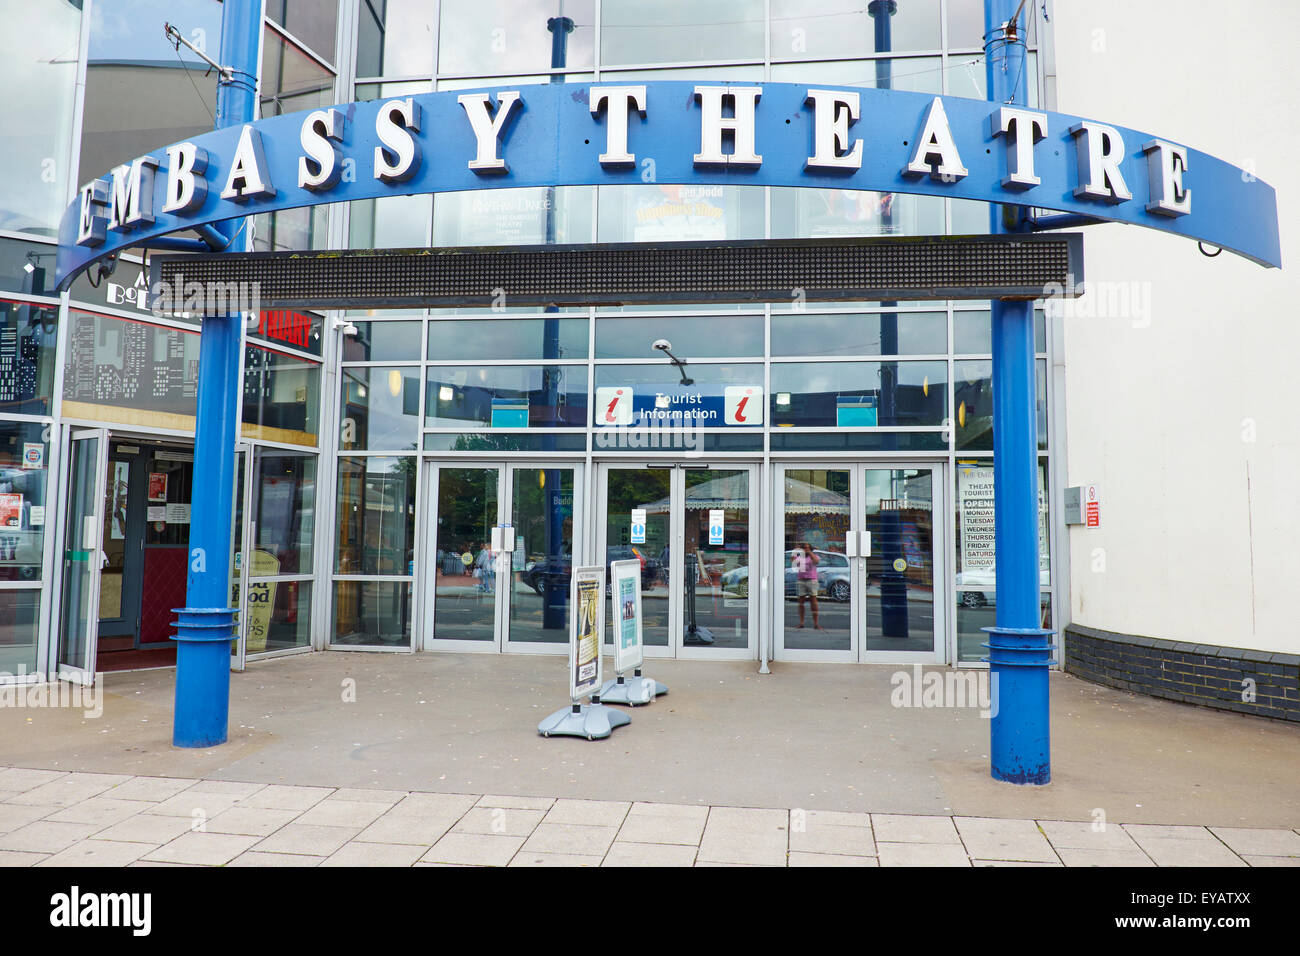 Embassy Theatre Grand Parade Skegness Lincolnshire UK Stock Photo